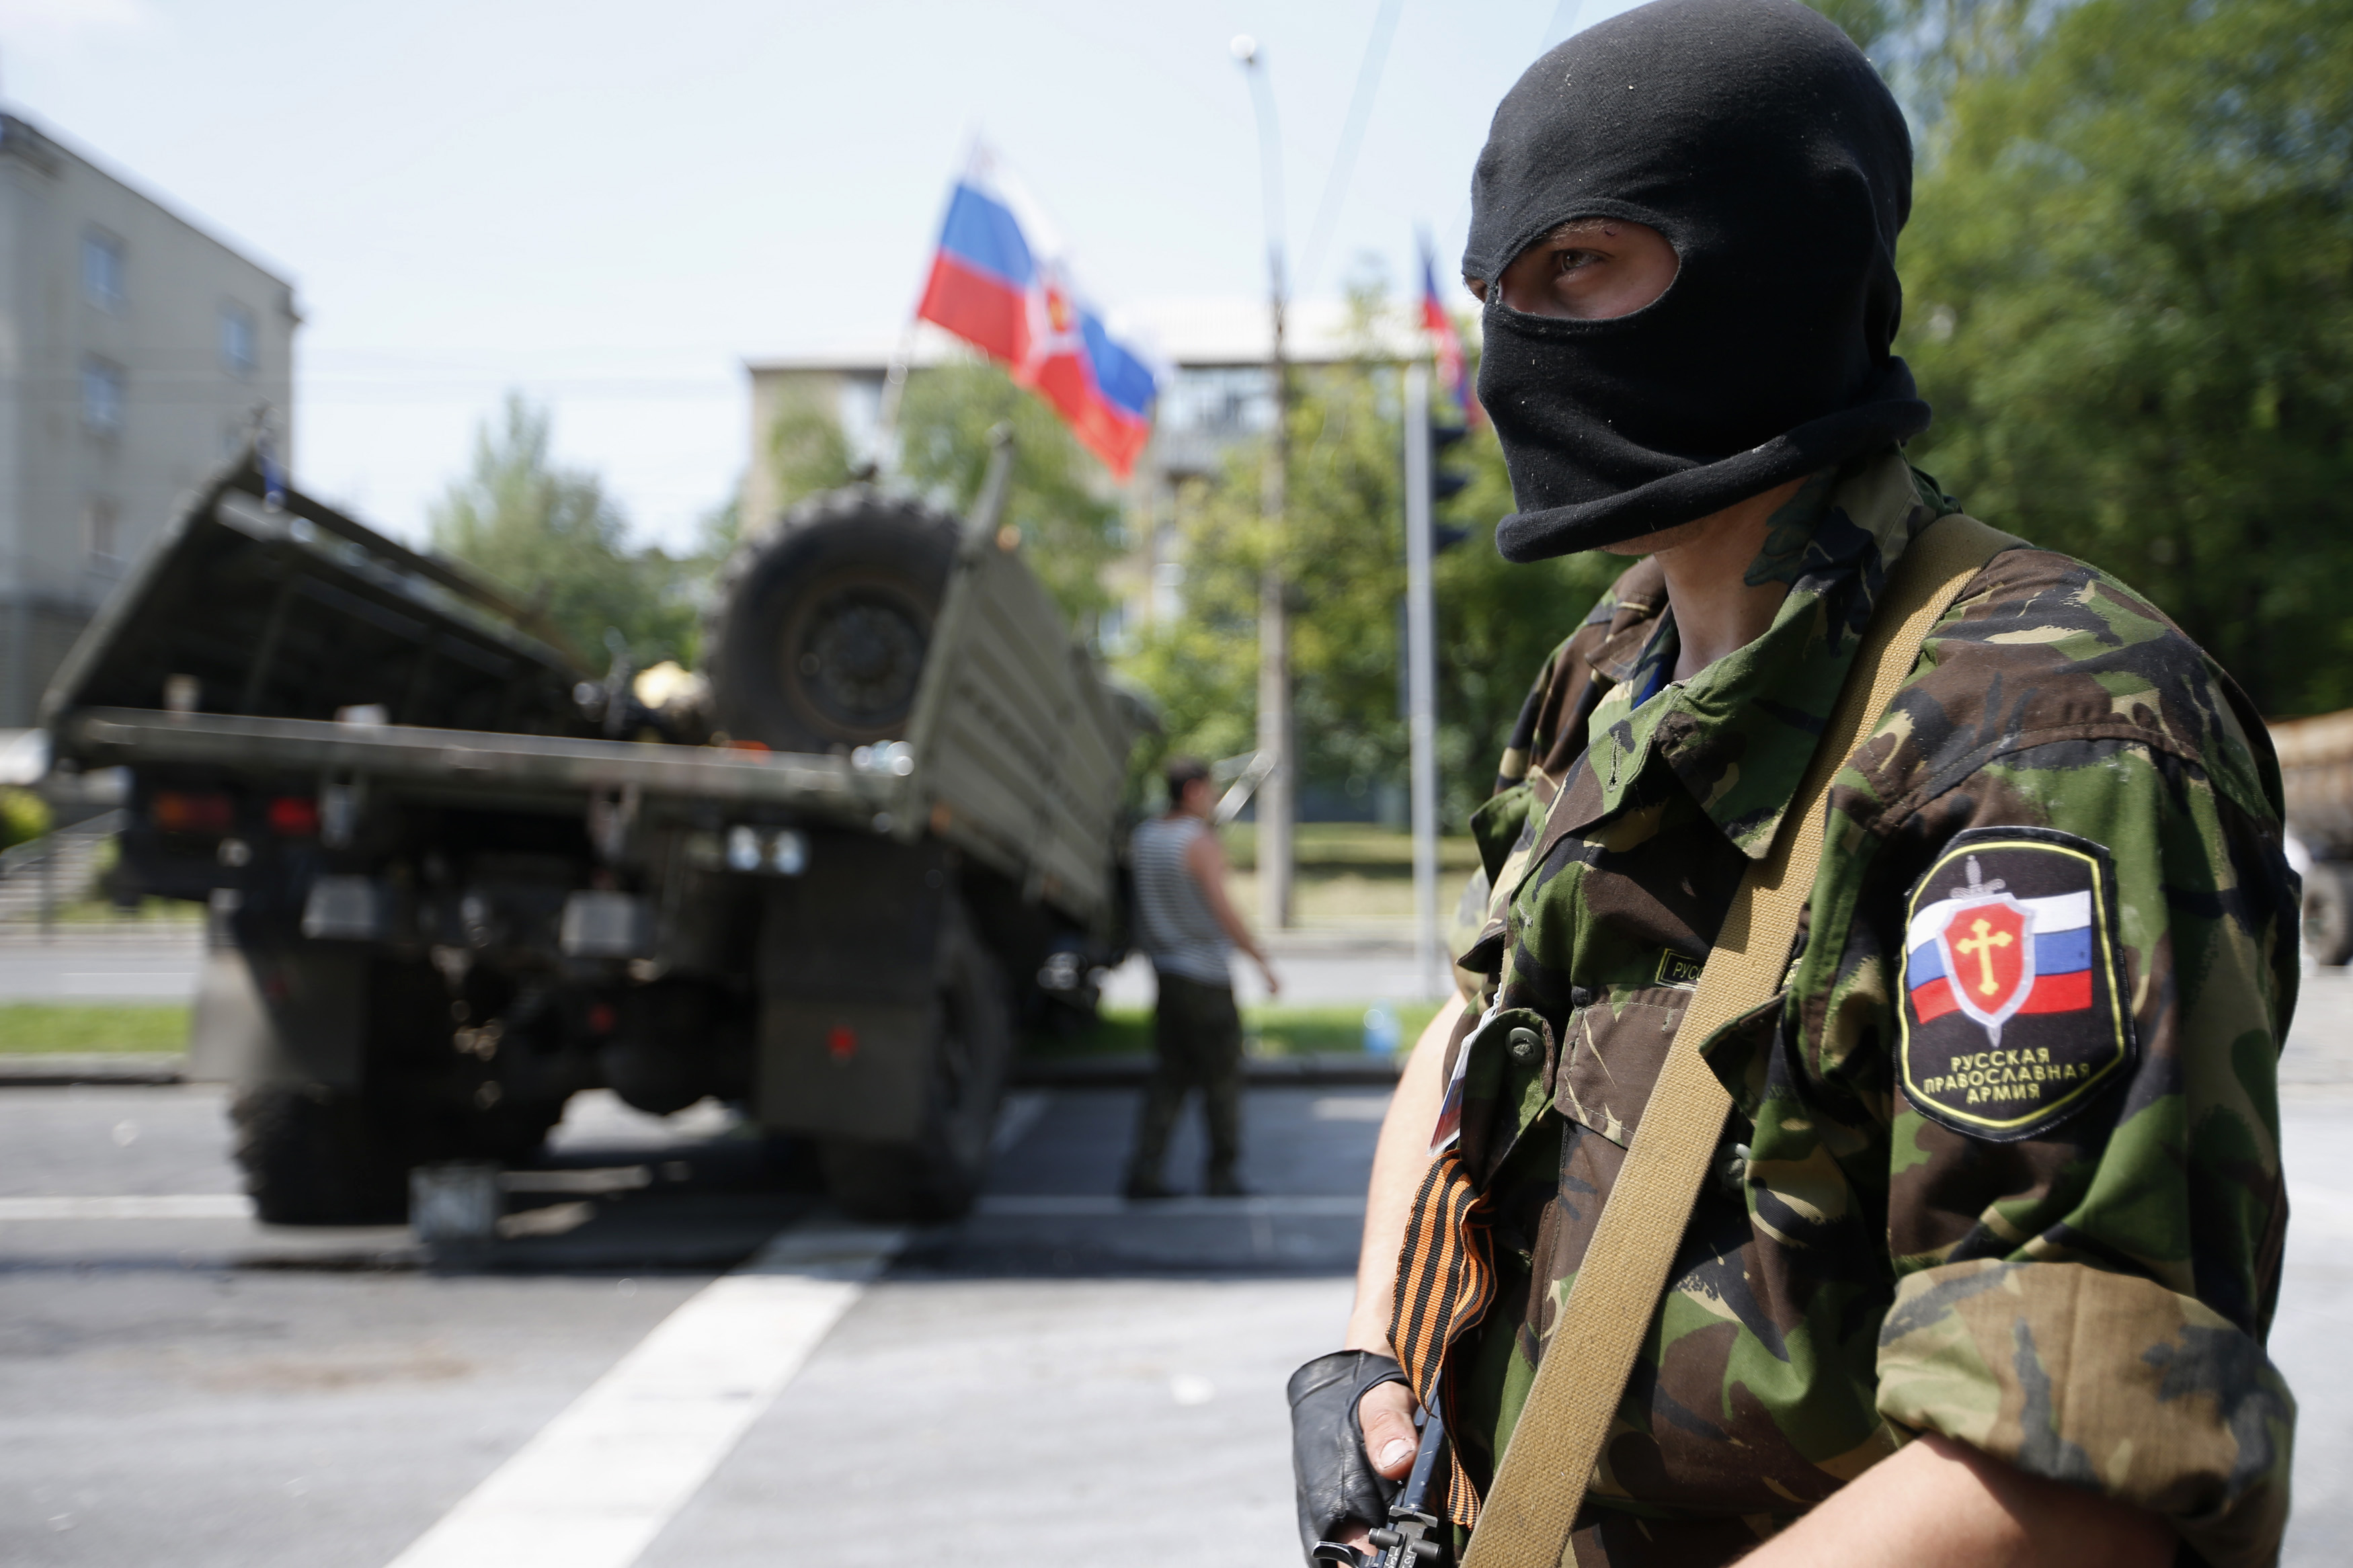 A member of a newly-formed pro-Russian armed group called the Russian Orthodox Army mans a barricade near Donetsk airport on May 29, 2014 in Donetsk, Ukraine. (Maxim Zmeyev—Reuters)